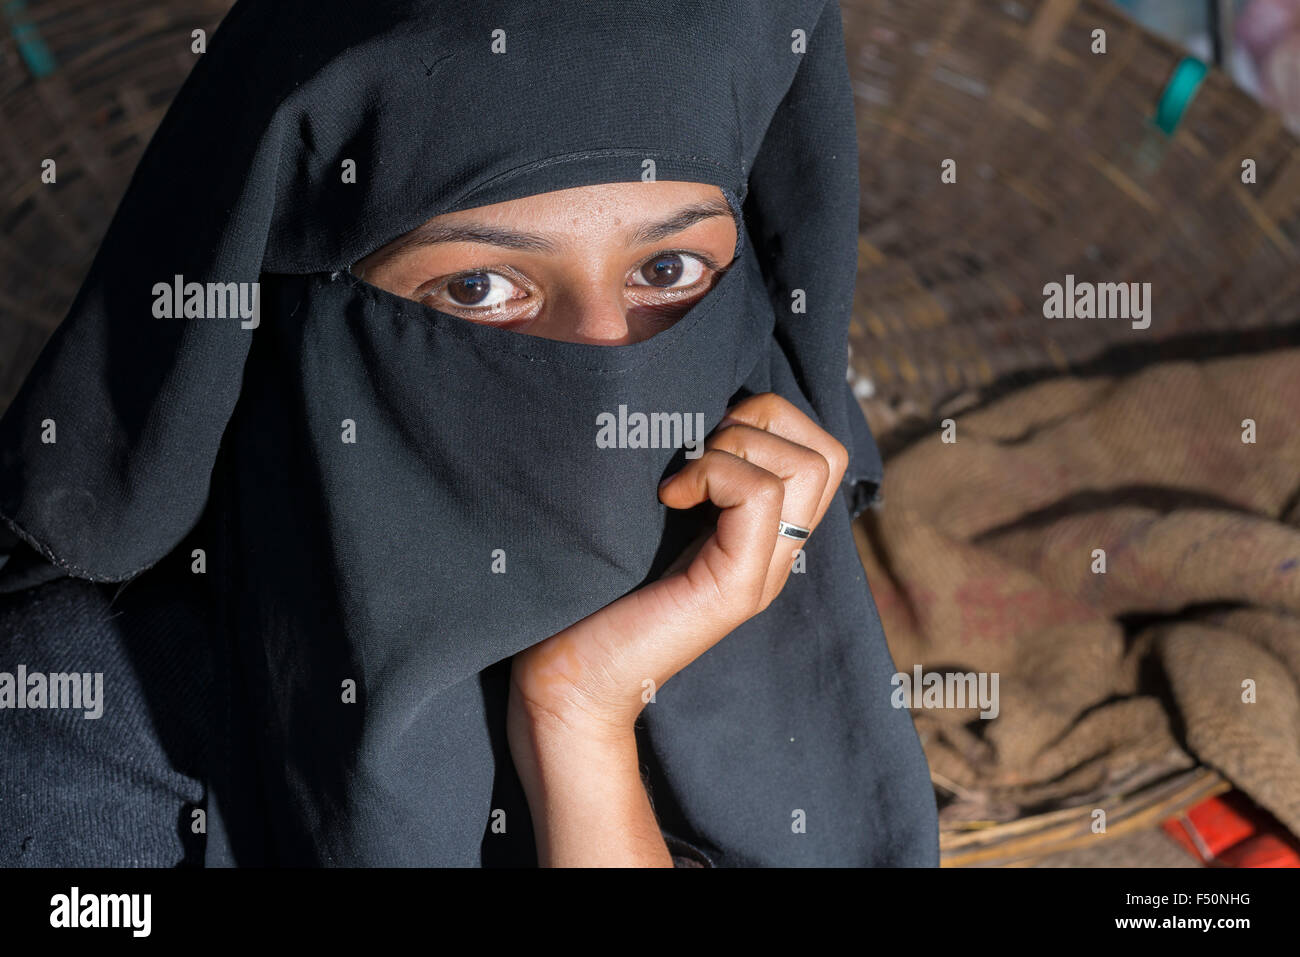 A young muslim woman, her face covered by a black hijab, veil, is selling vegetables in the market Stock Photo